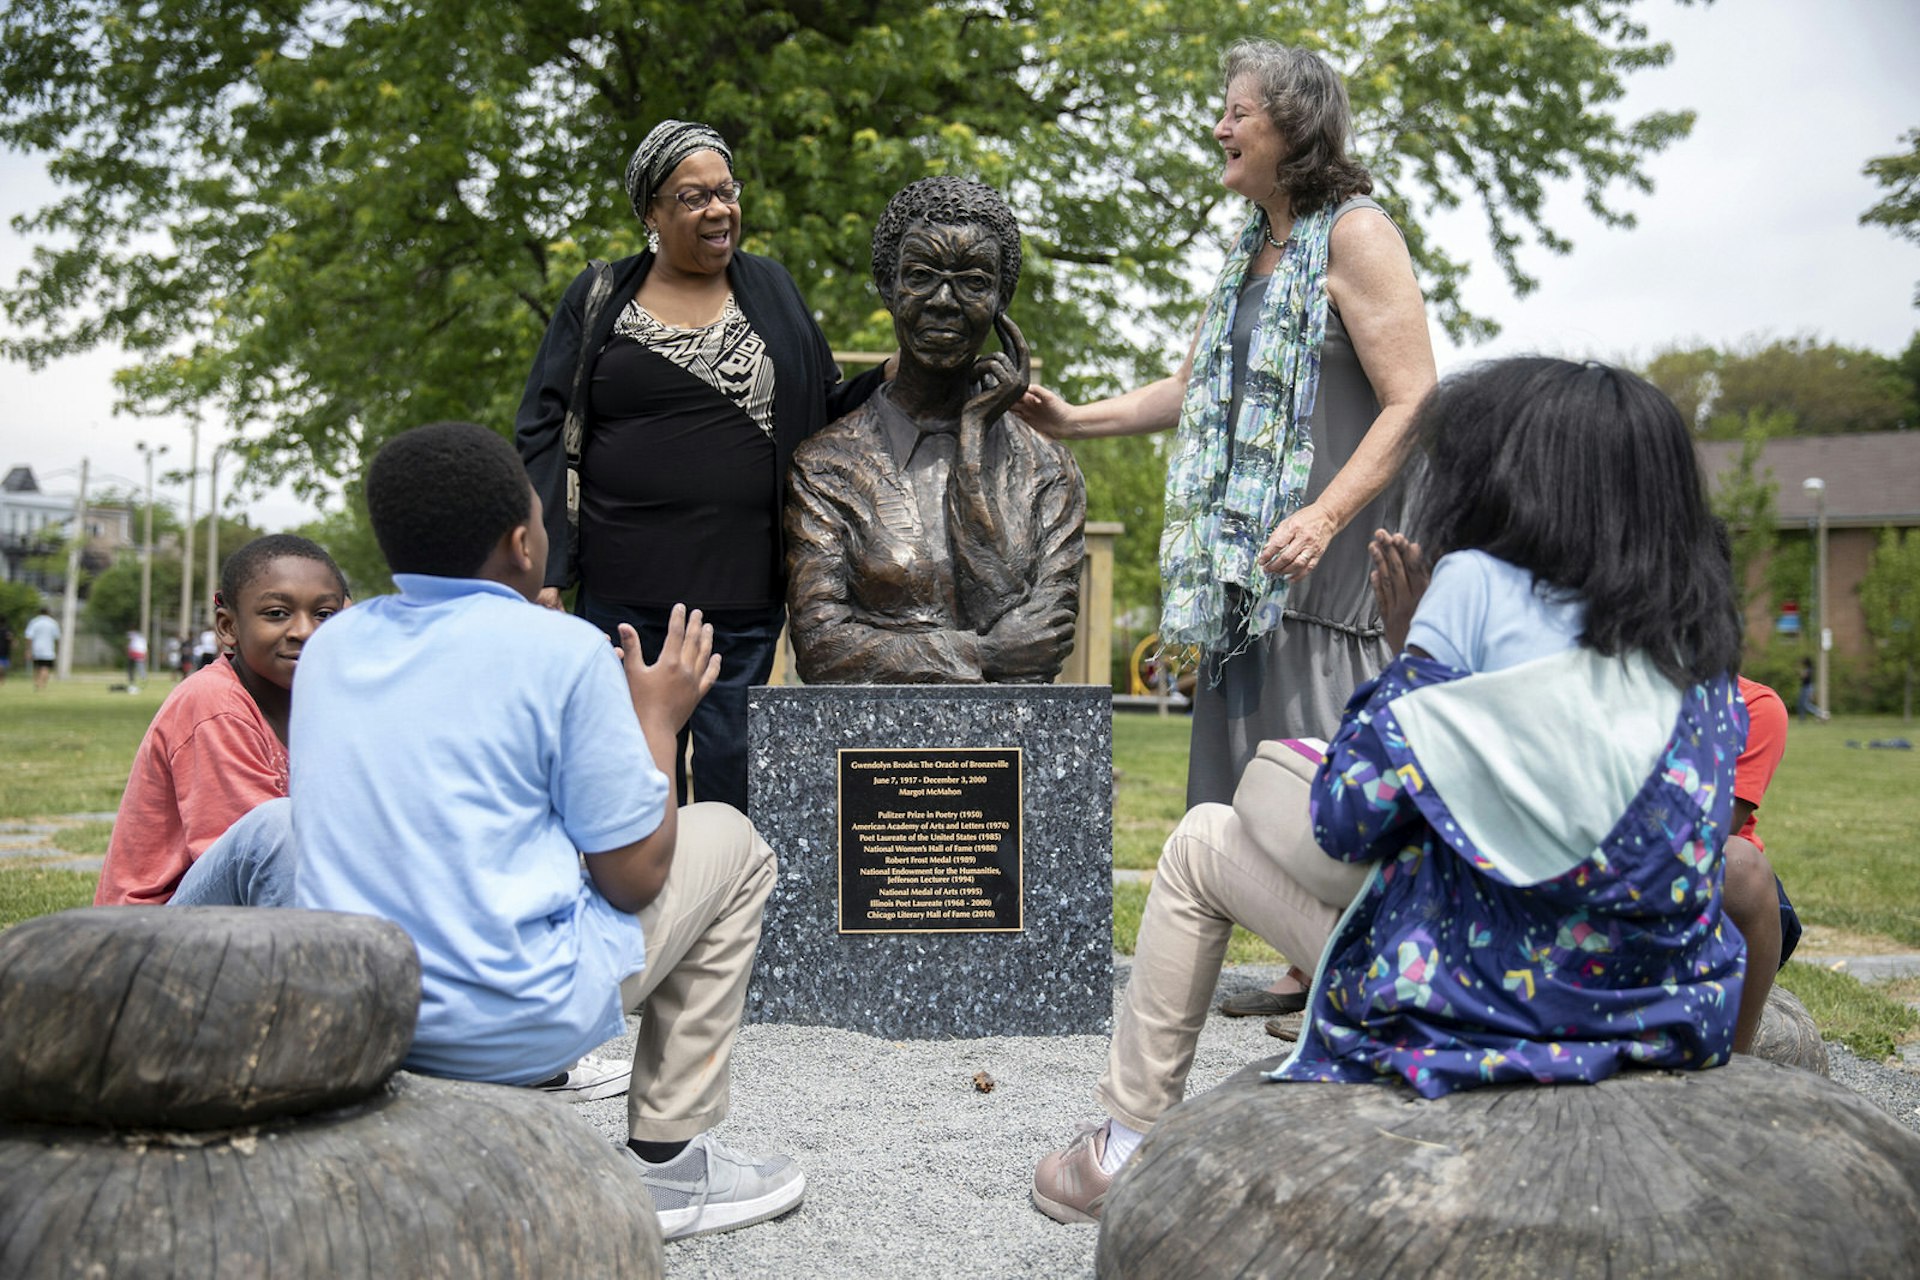 A group of people gather around Gwendolyn Brooks' statue in the Chicago park named after her